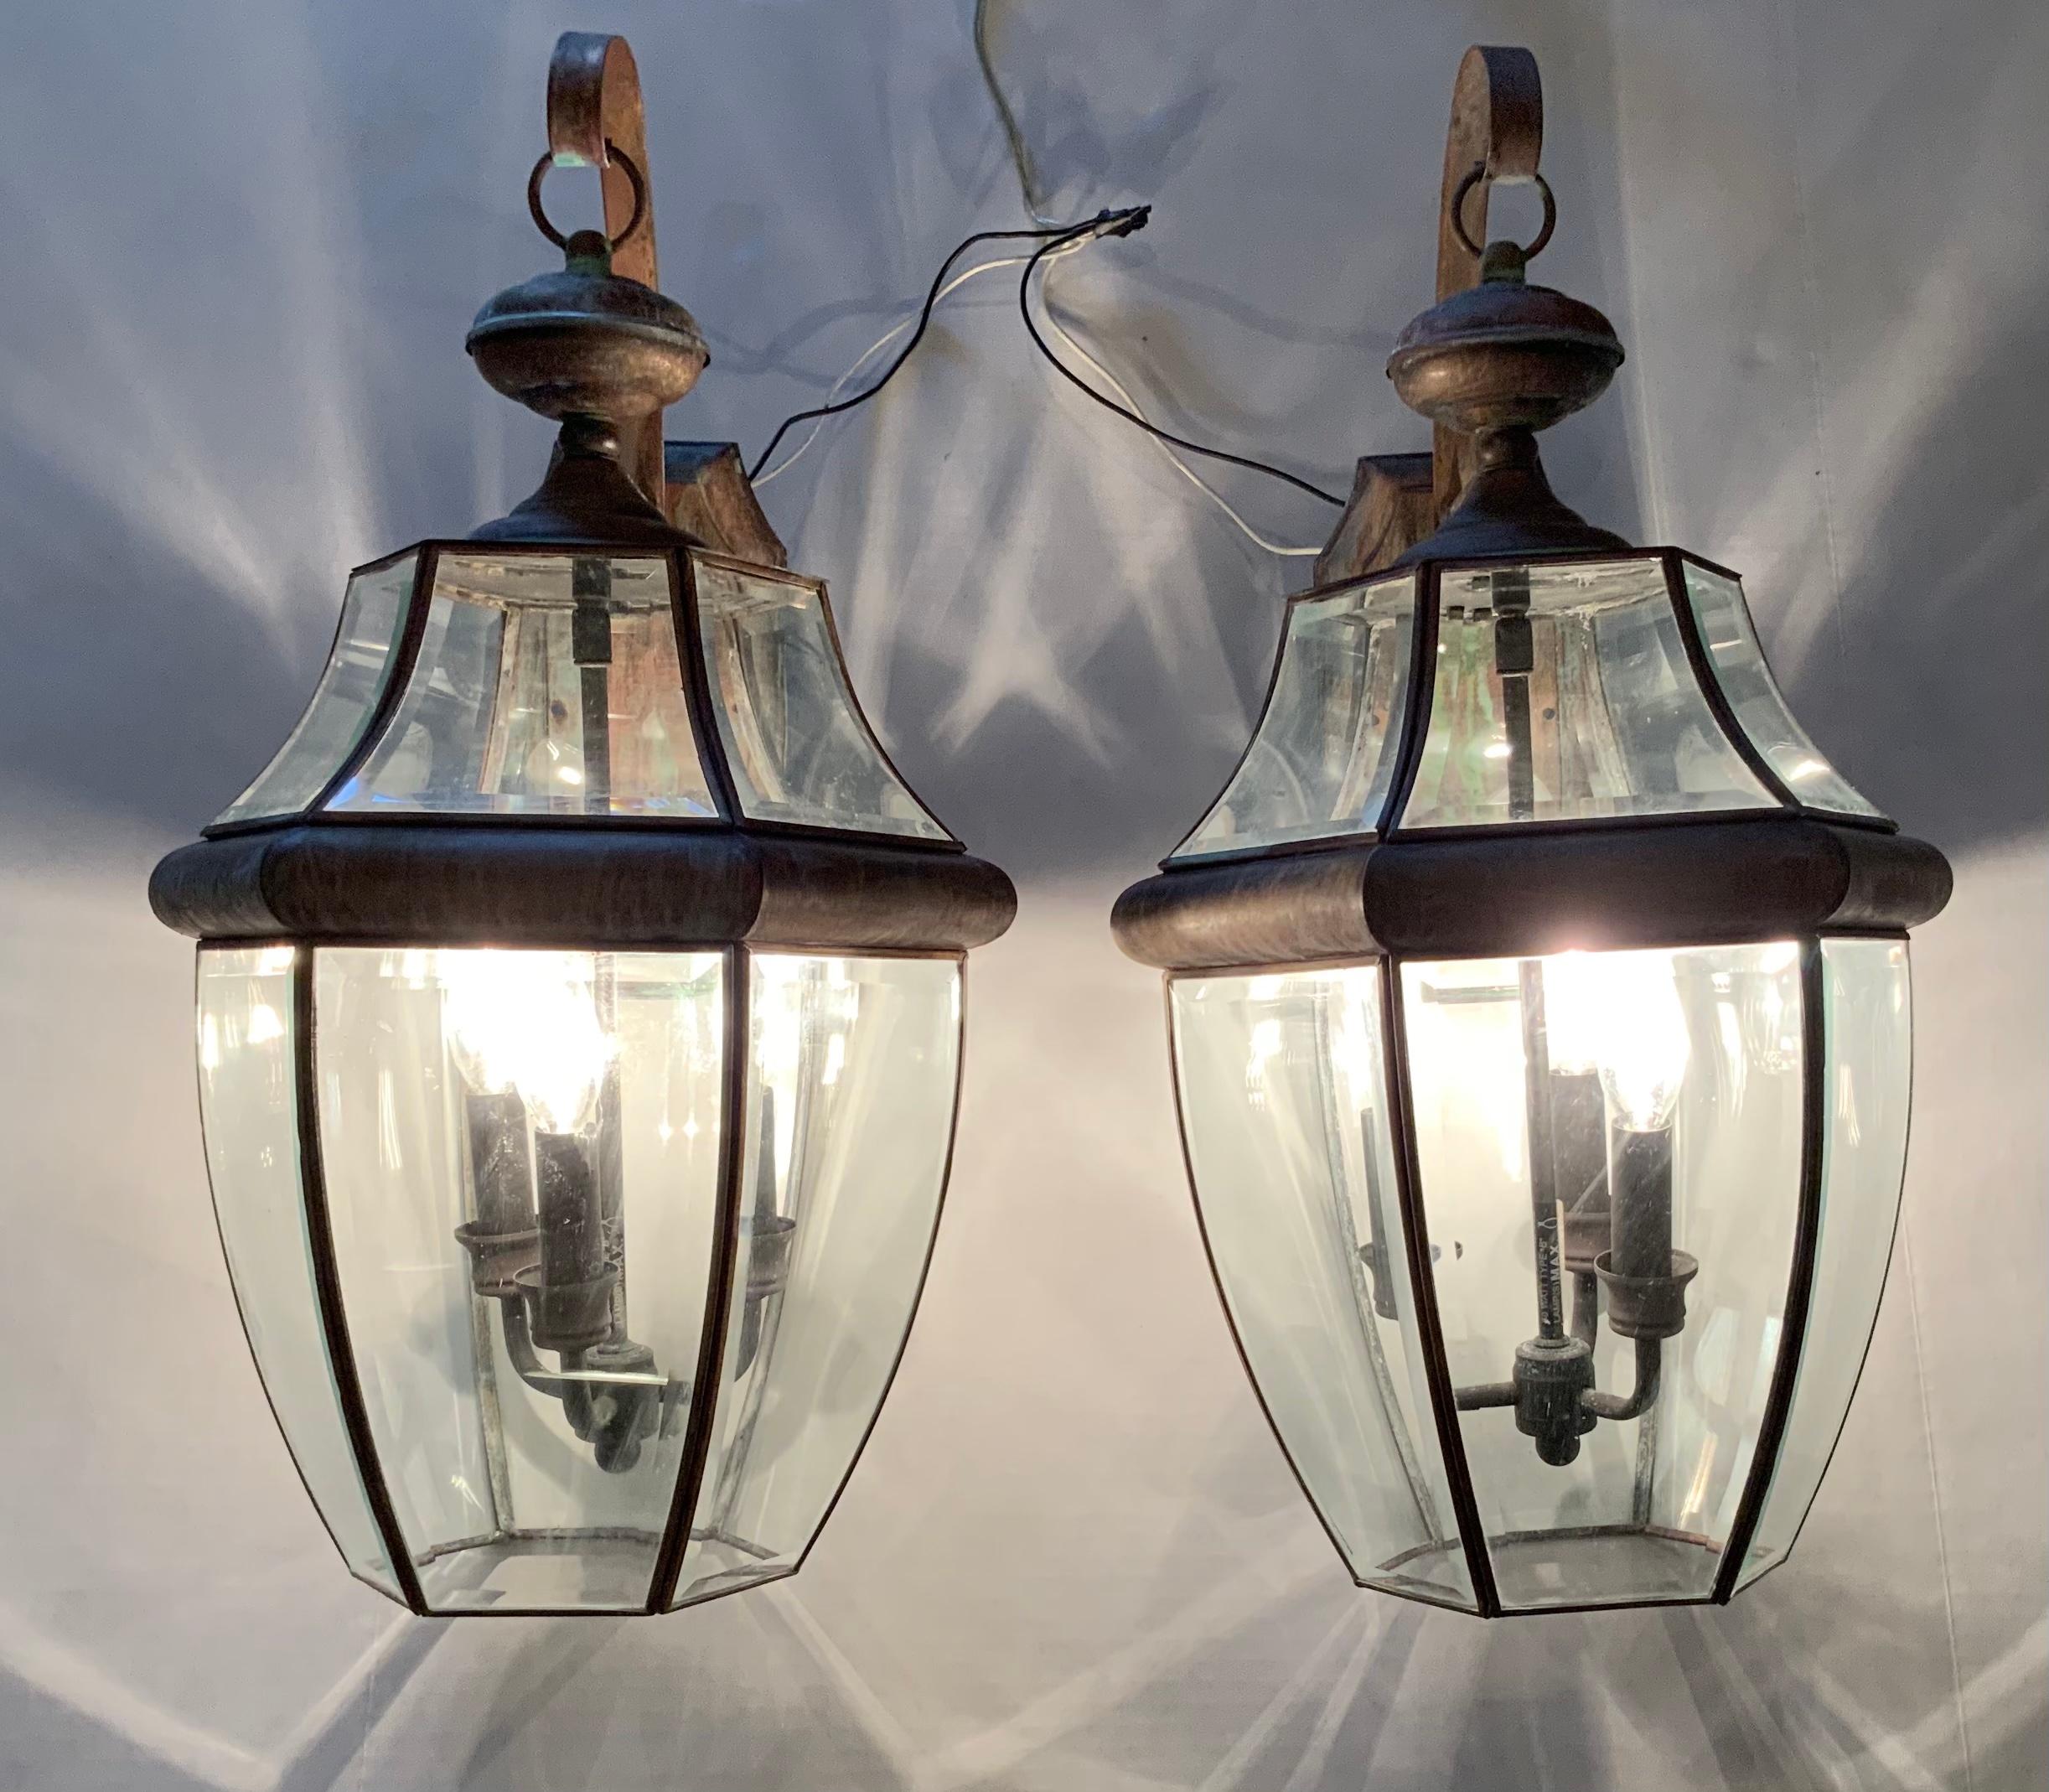 Pair of elegant wall lanterns made of solid brass, six sides of beveled glass, with three-light of 60/watt each. Up to US code ready to use.